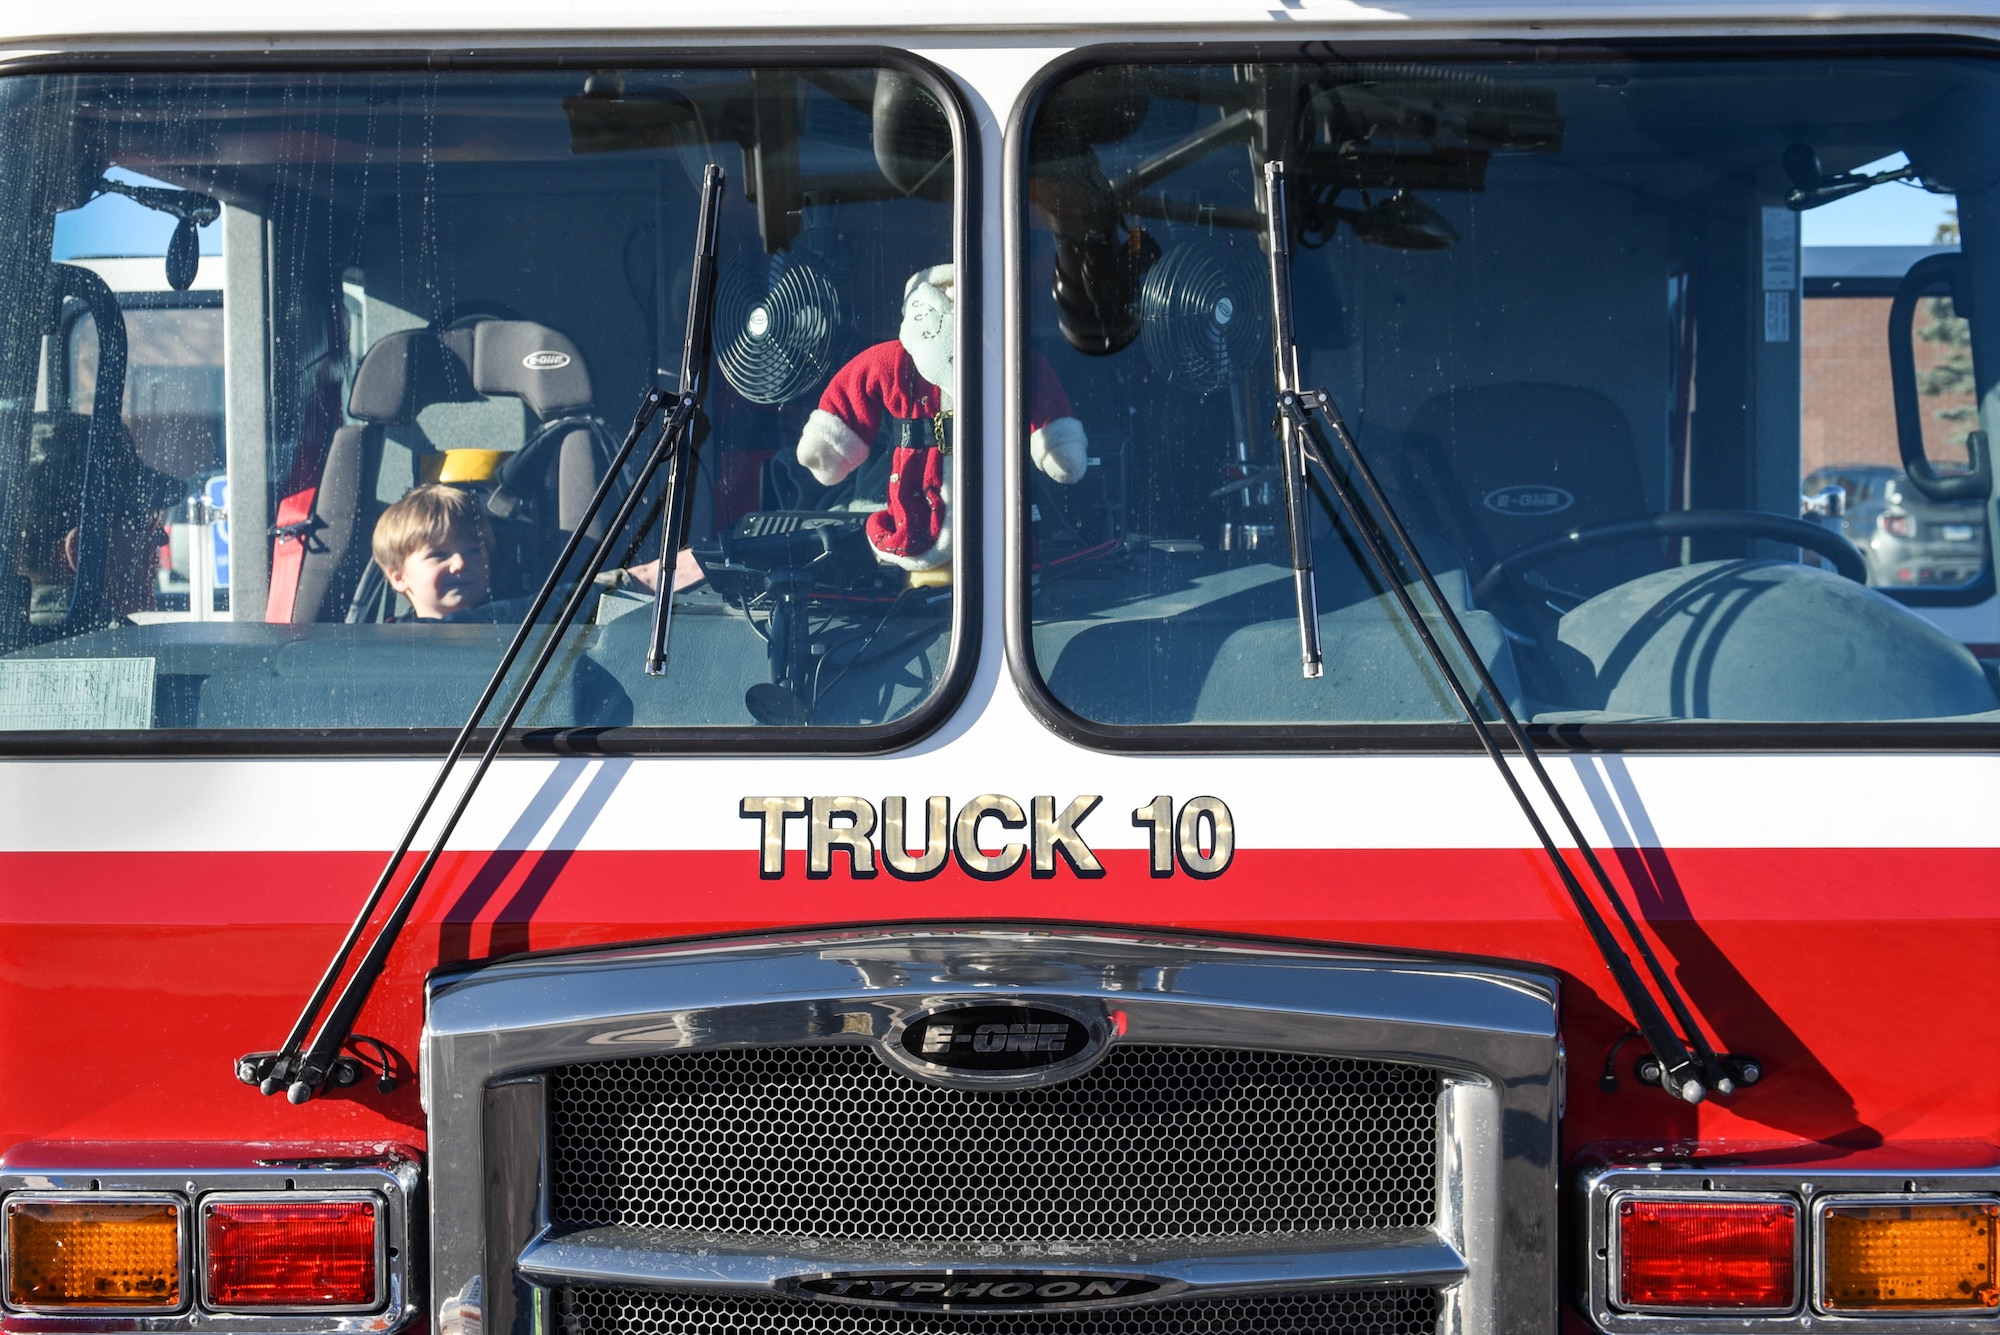 A child at Ellsworth Air Force Base, S.D., is given the chance sit passenger in a stationary fire truck on Dec. 13, 2018. Following a “Santa and Me Story Time” event at the Holbrook Library, attendees were invited to the parking lot to tour a fire truck and visit with firefighters from the 28th Civil Engineer Squadron Fire Department. (U.S. Air Force photo by Airman John Ennis)